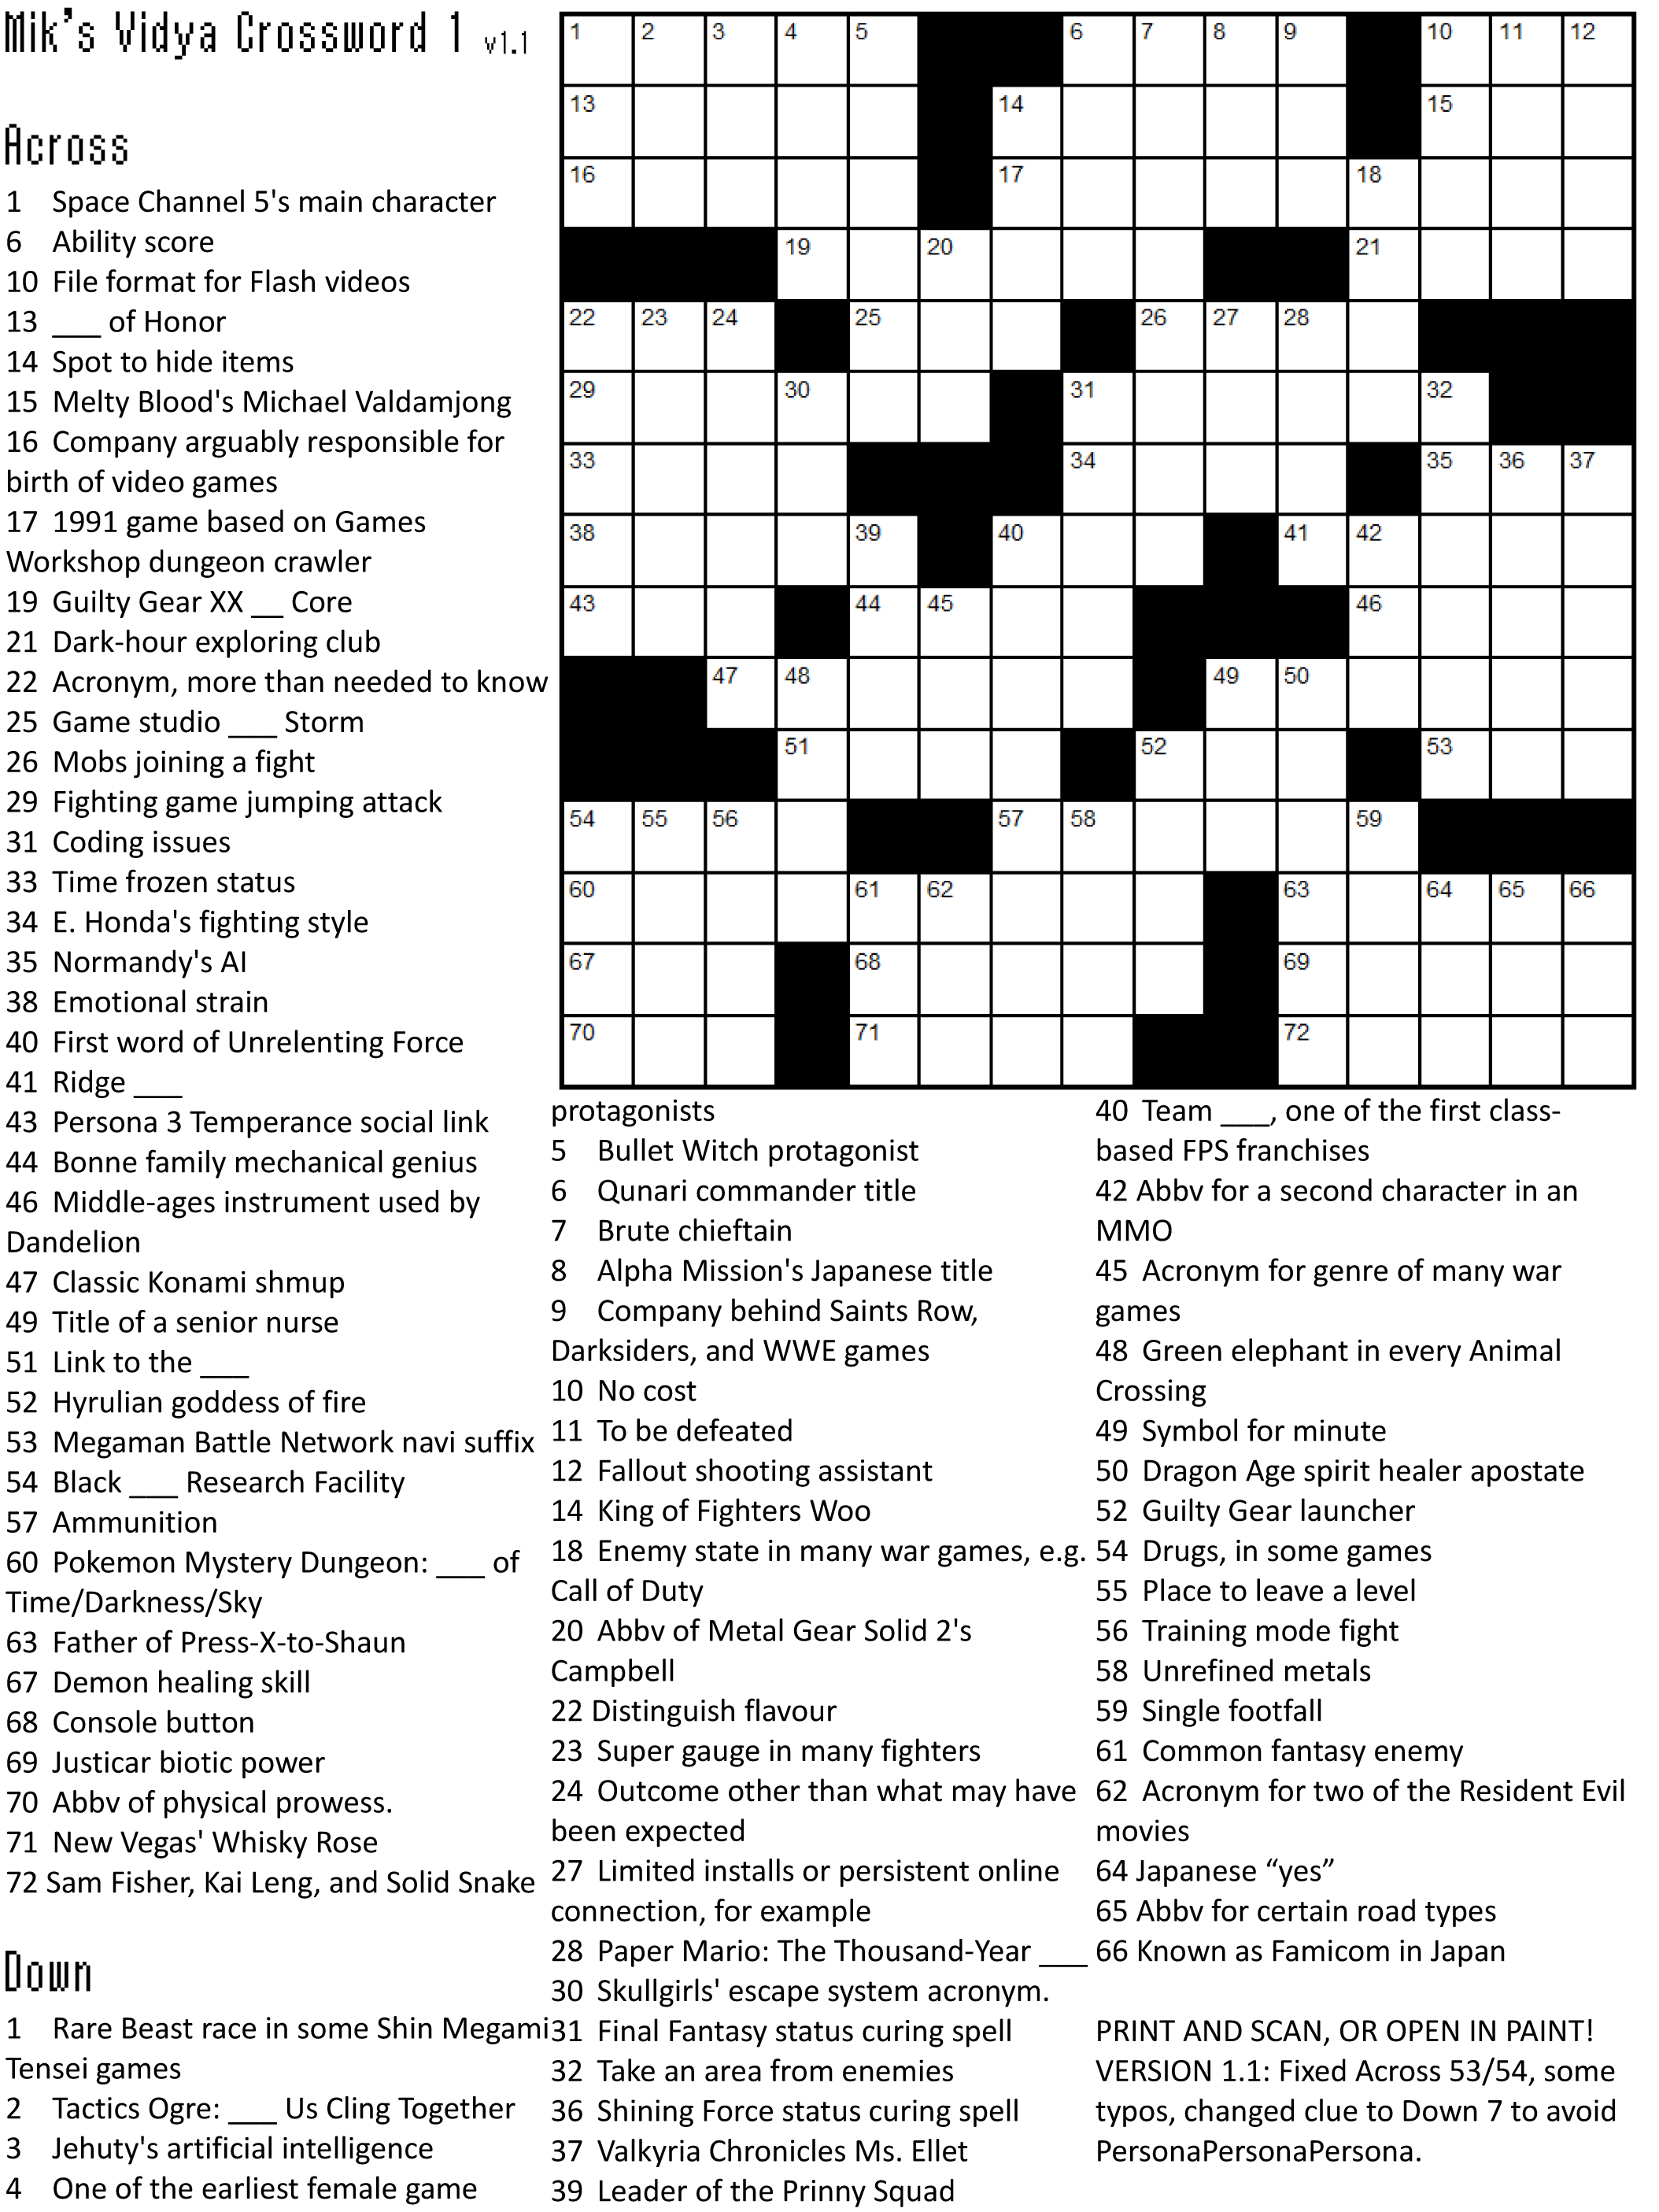 Free Printable Full Square Crossword Puzzles For Kids